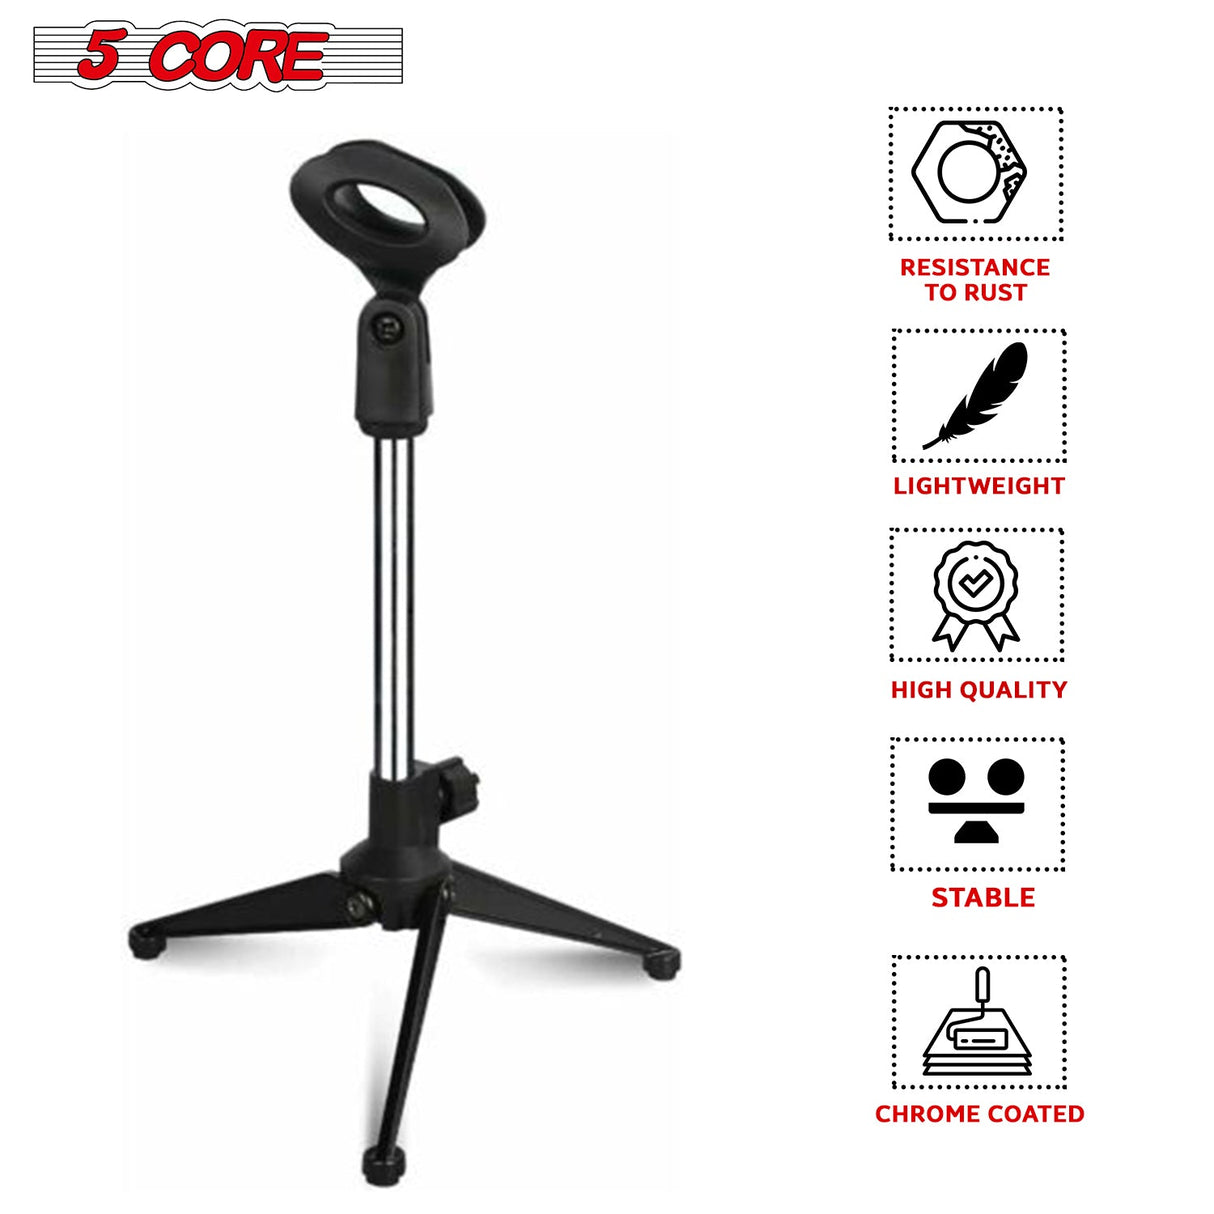 5 Core 2 Pieces Premium Mini Microphone Stand Tripod Universal Adjustable Desk Microphone Stand Portable Foldable Table Top Desktop Stand with Small Plastic Microphone Clip MS MINI TRI CH 2PK